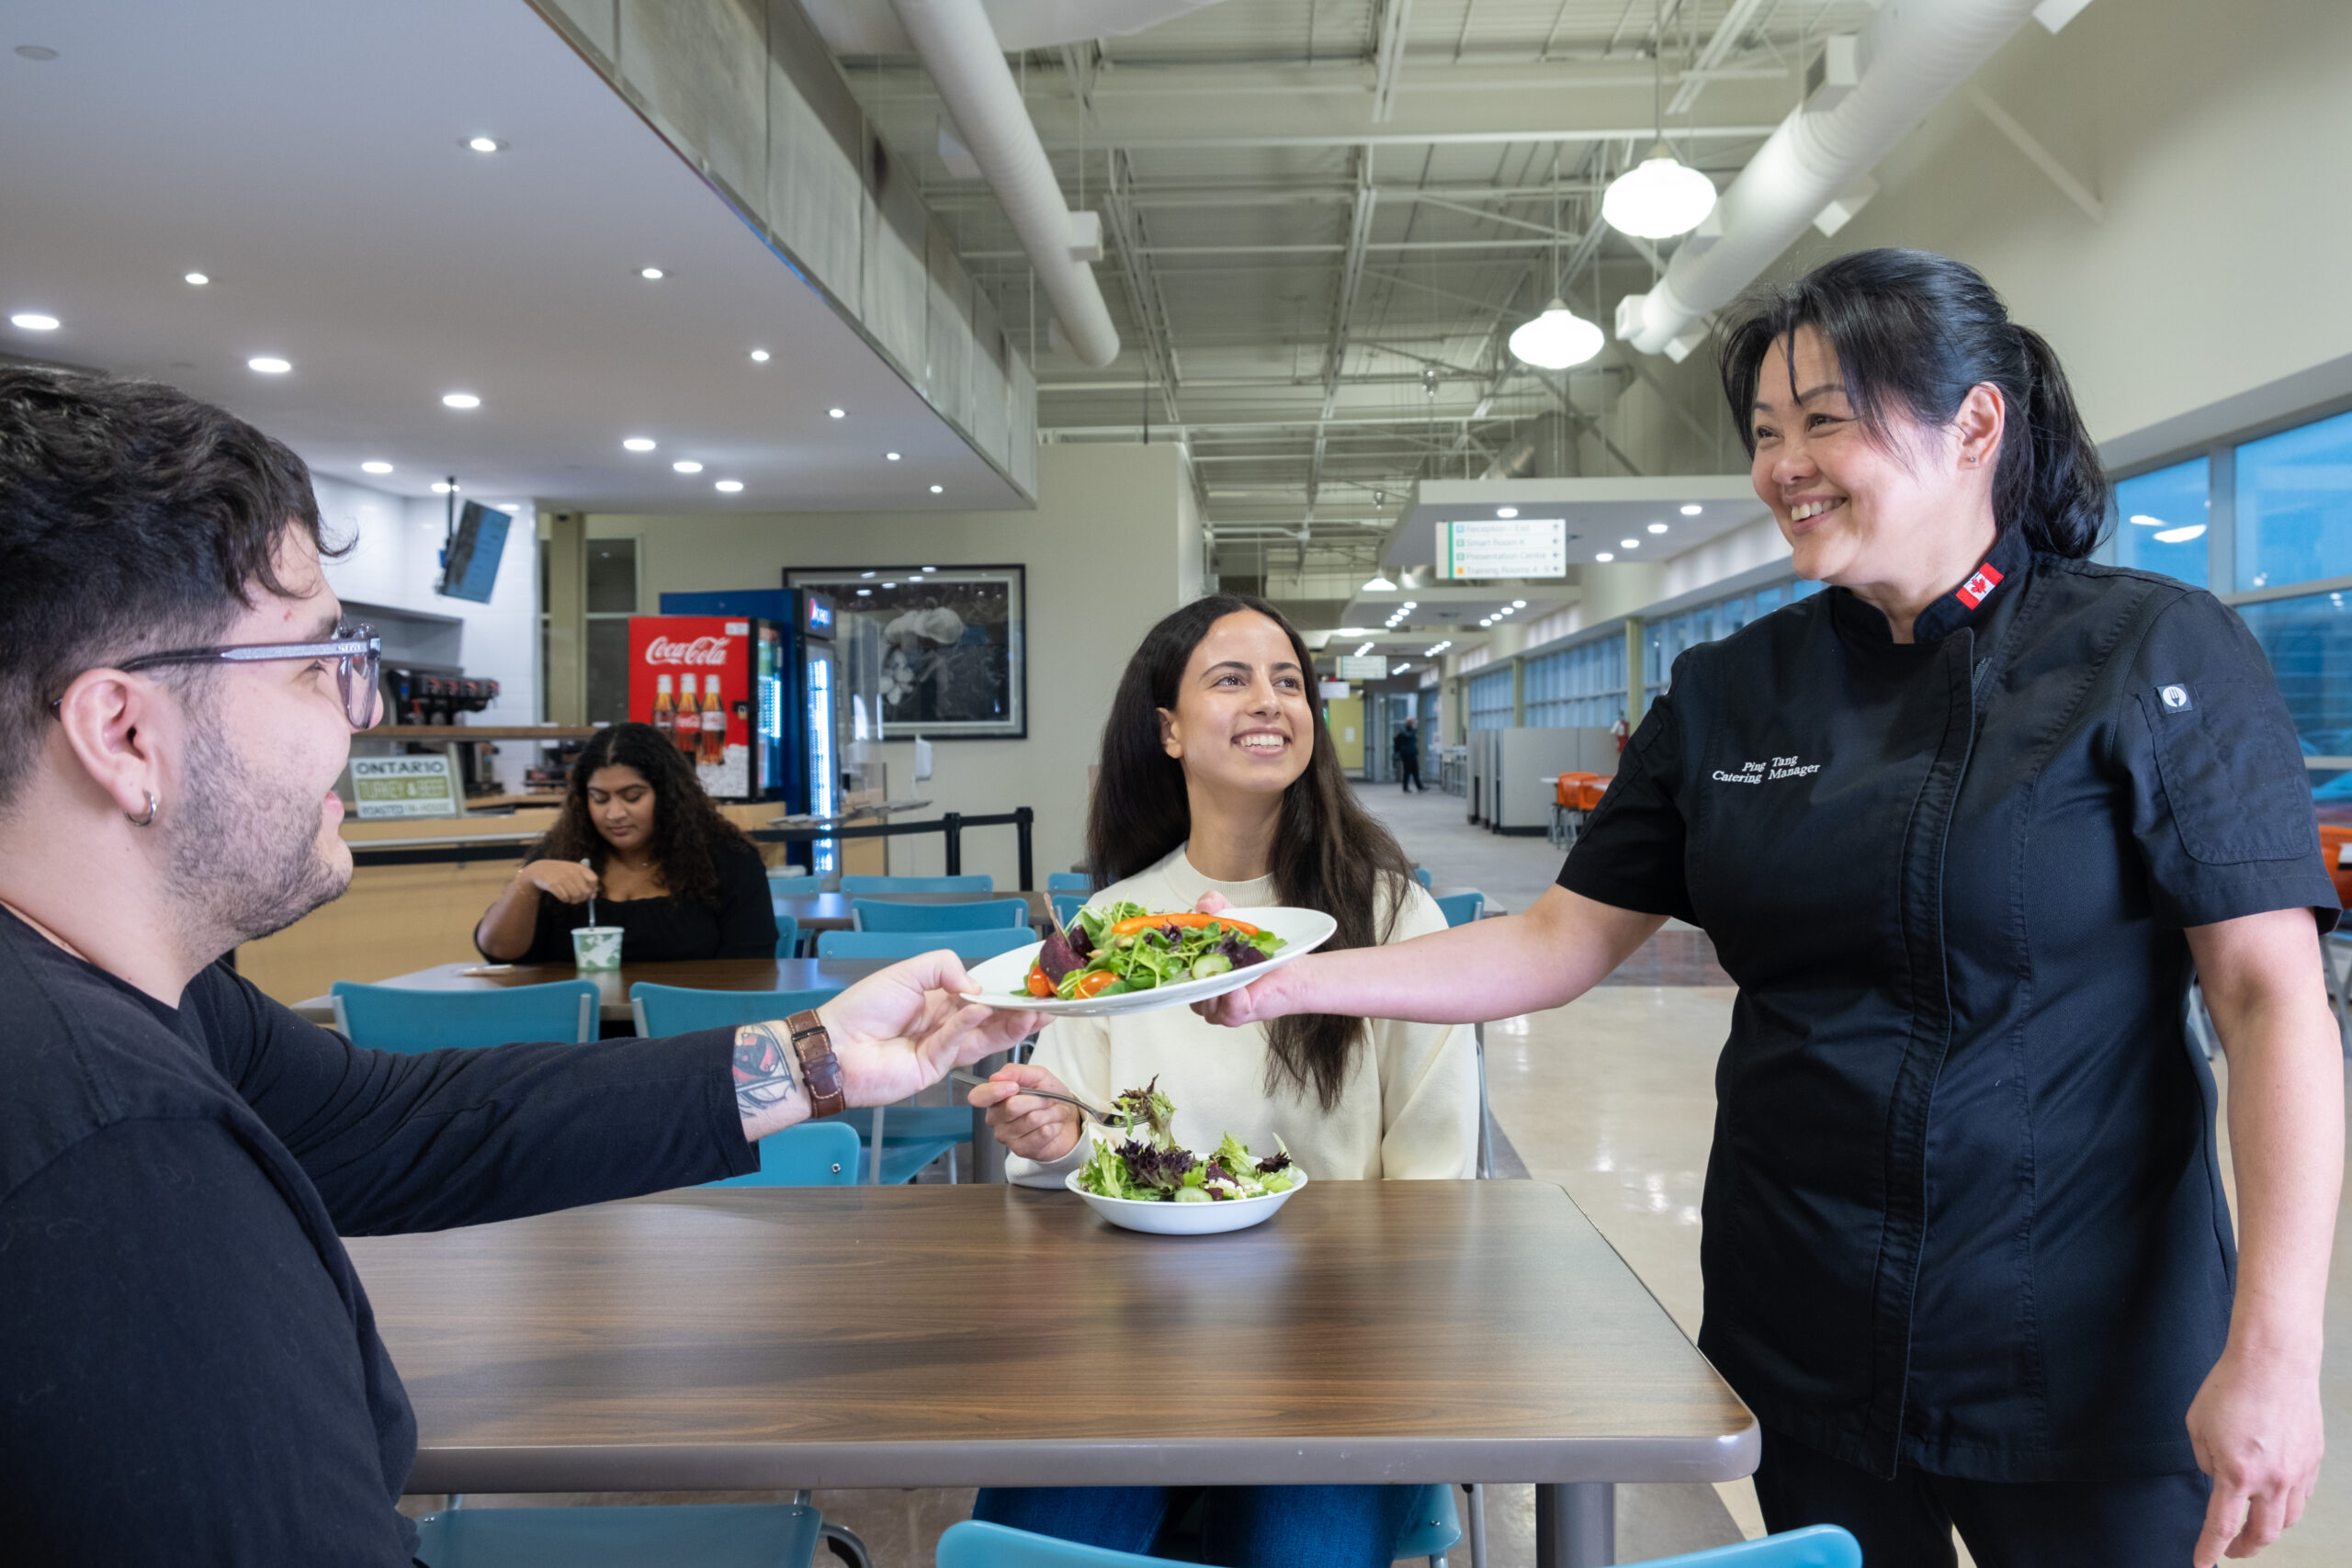 woman serving a plate of salad to a customer